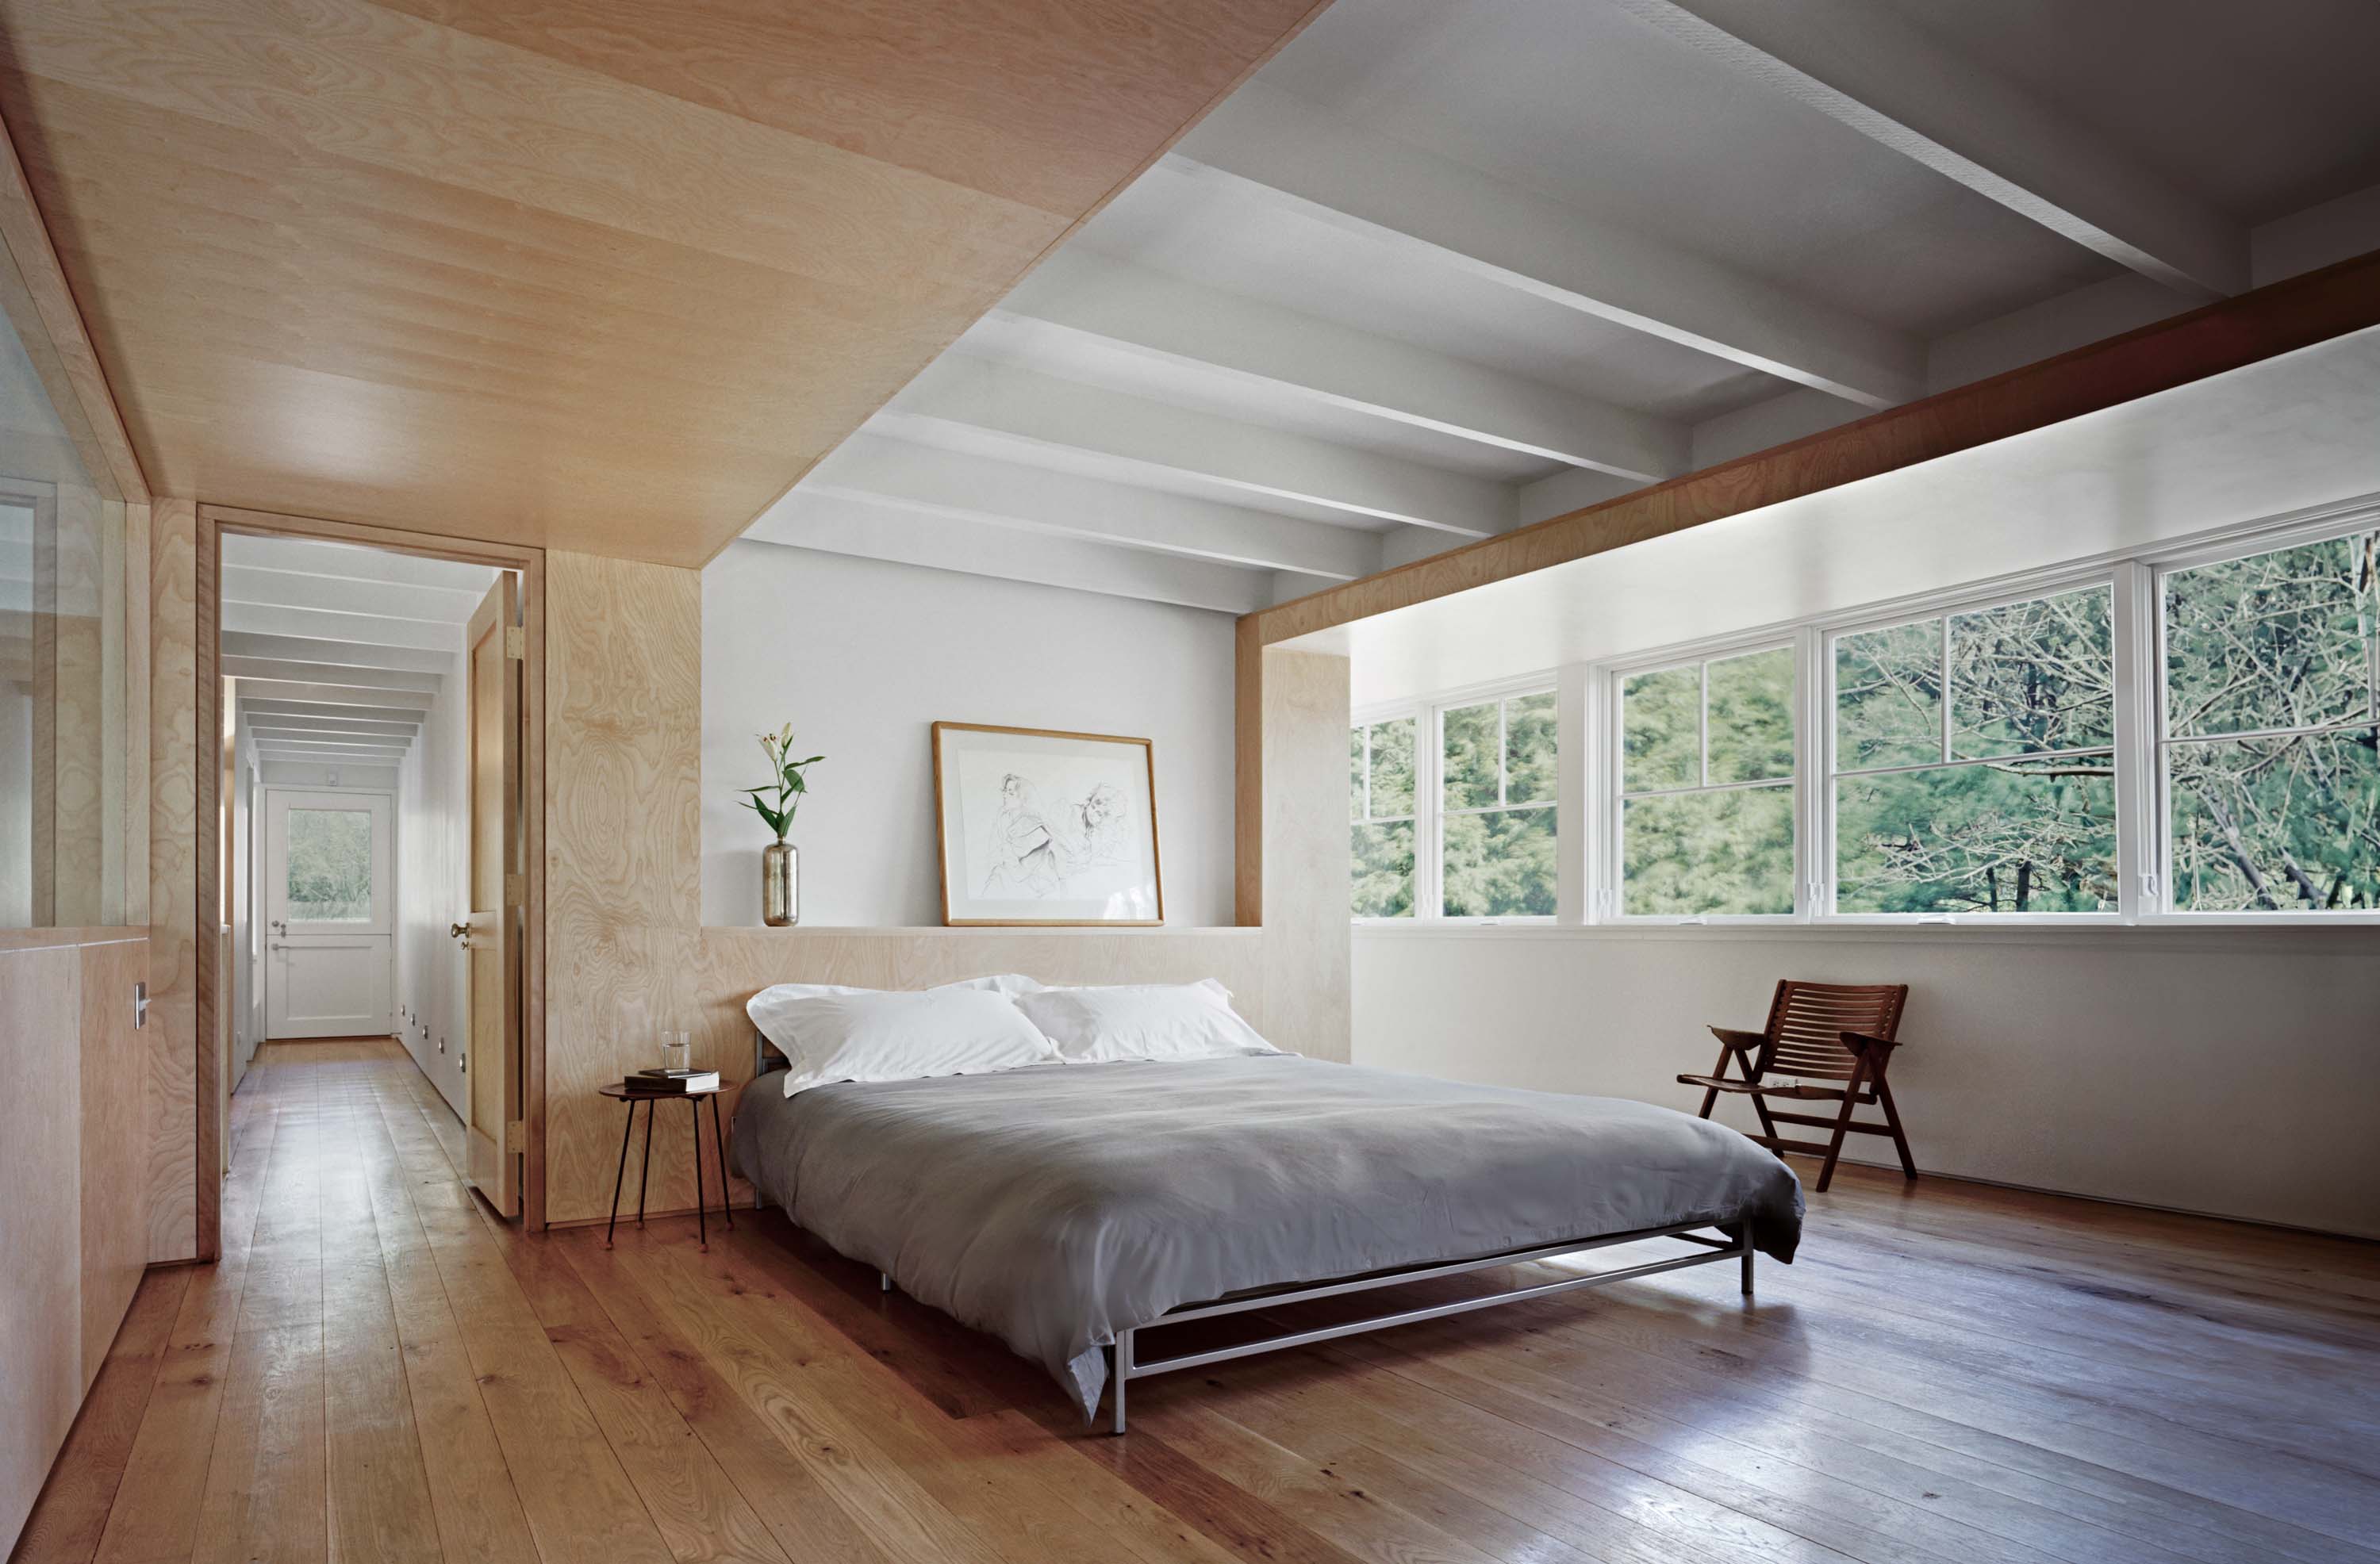 Master bedroom of the Modern Barn by Specht Novak Architects, showcasing the custom maple plywood adding contrast against the exposed white ceiling beams. Shot by Michael Moran.